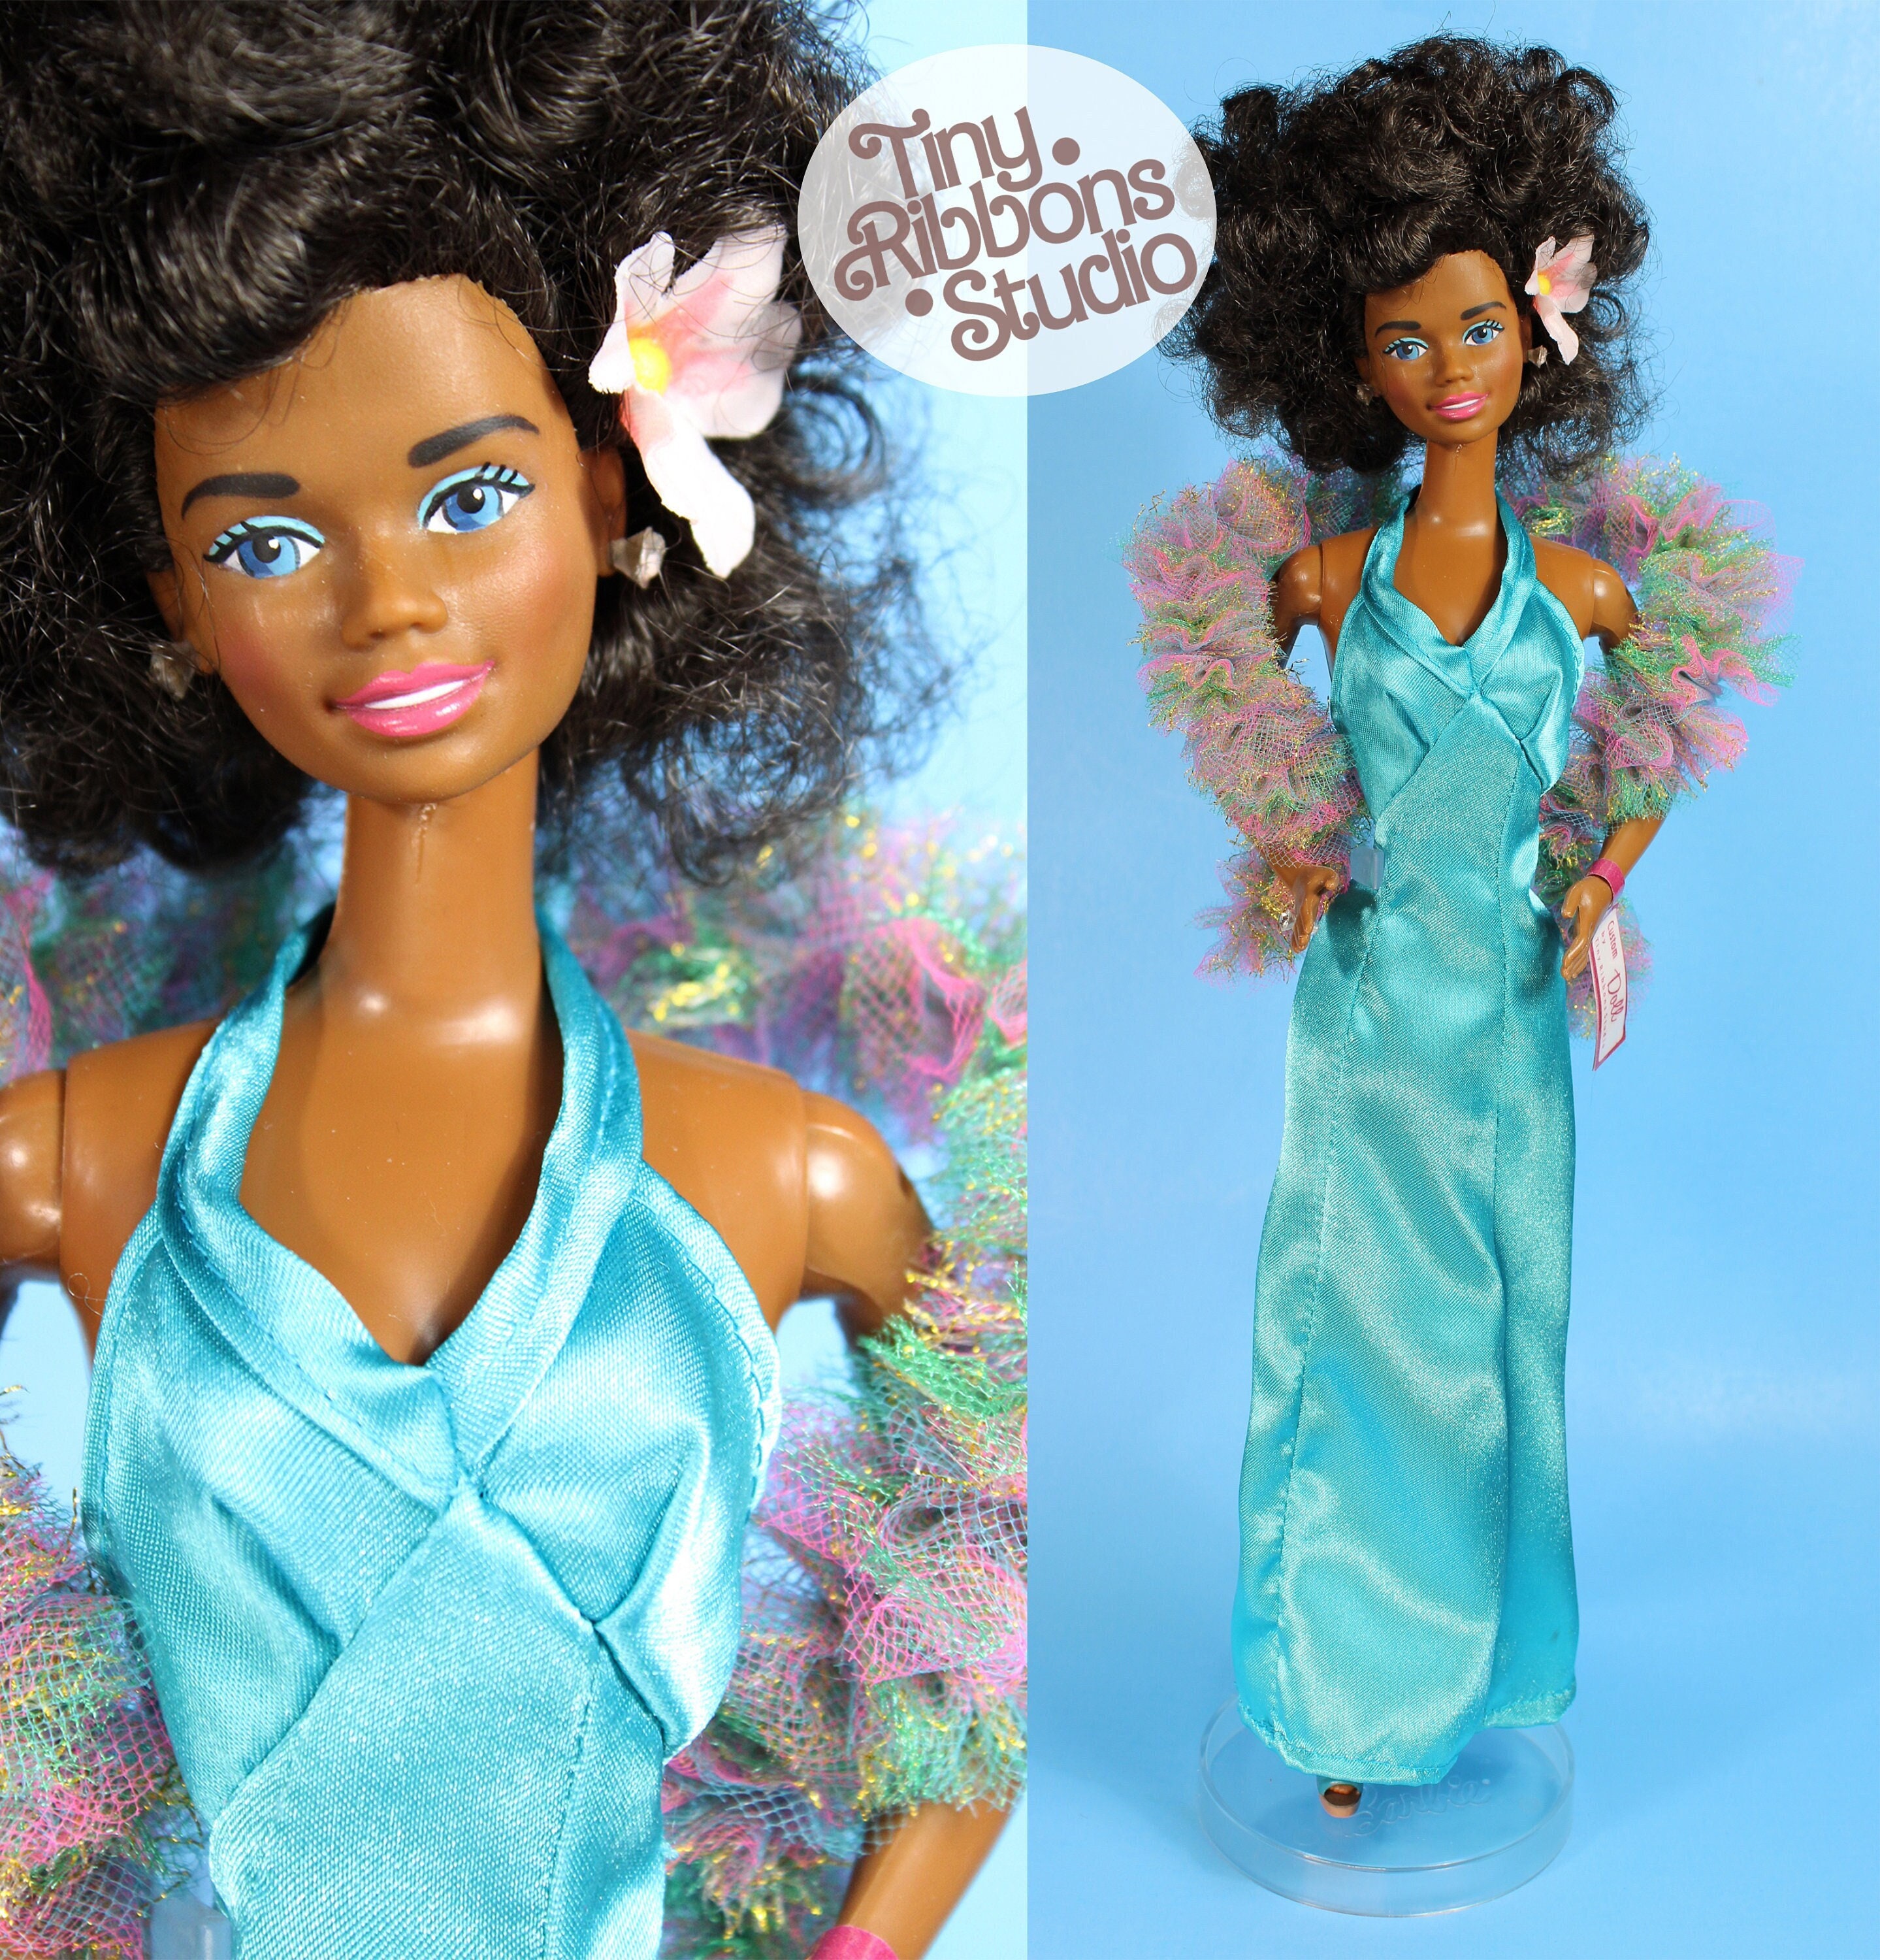 SALE Barbie Teresa OOAK Handmade Gown and Boa Holiday Special Ensemble 